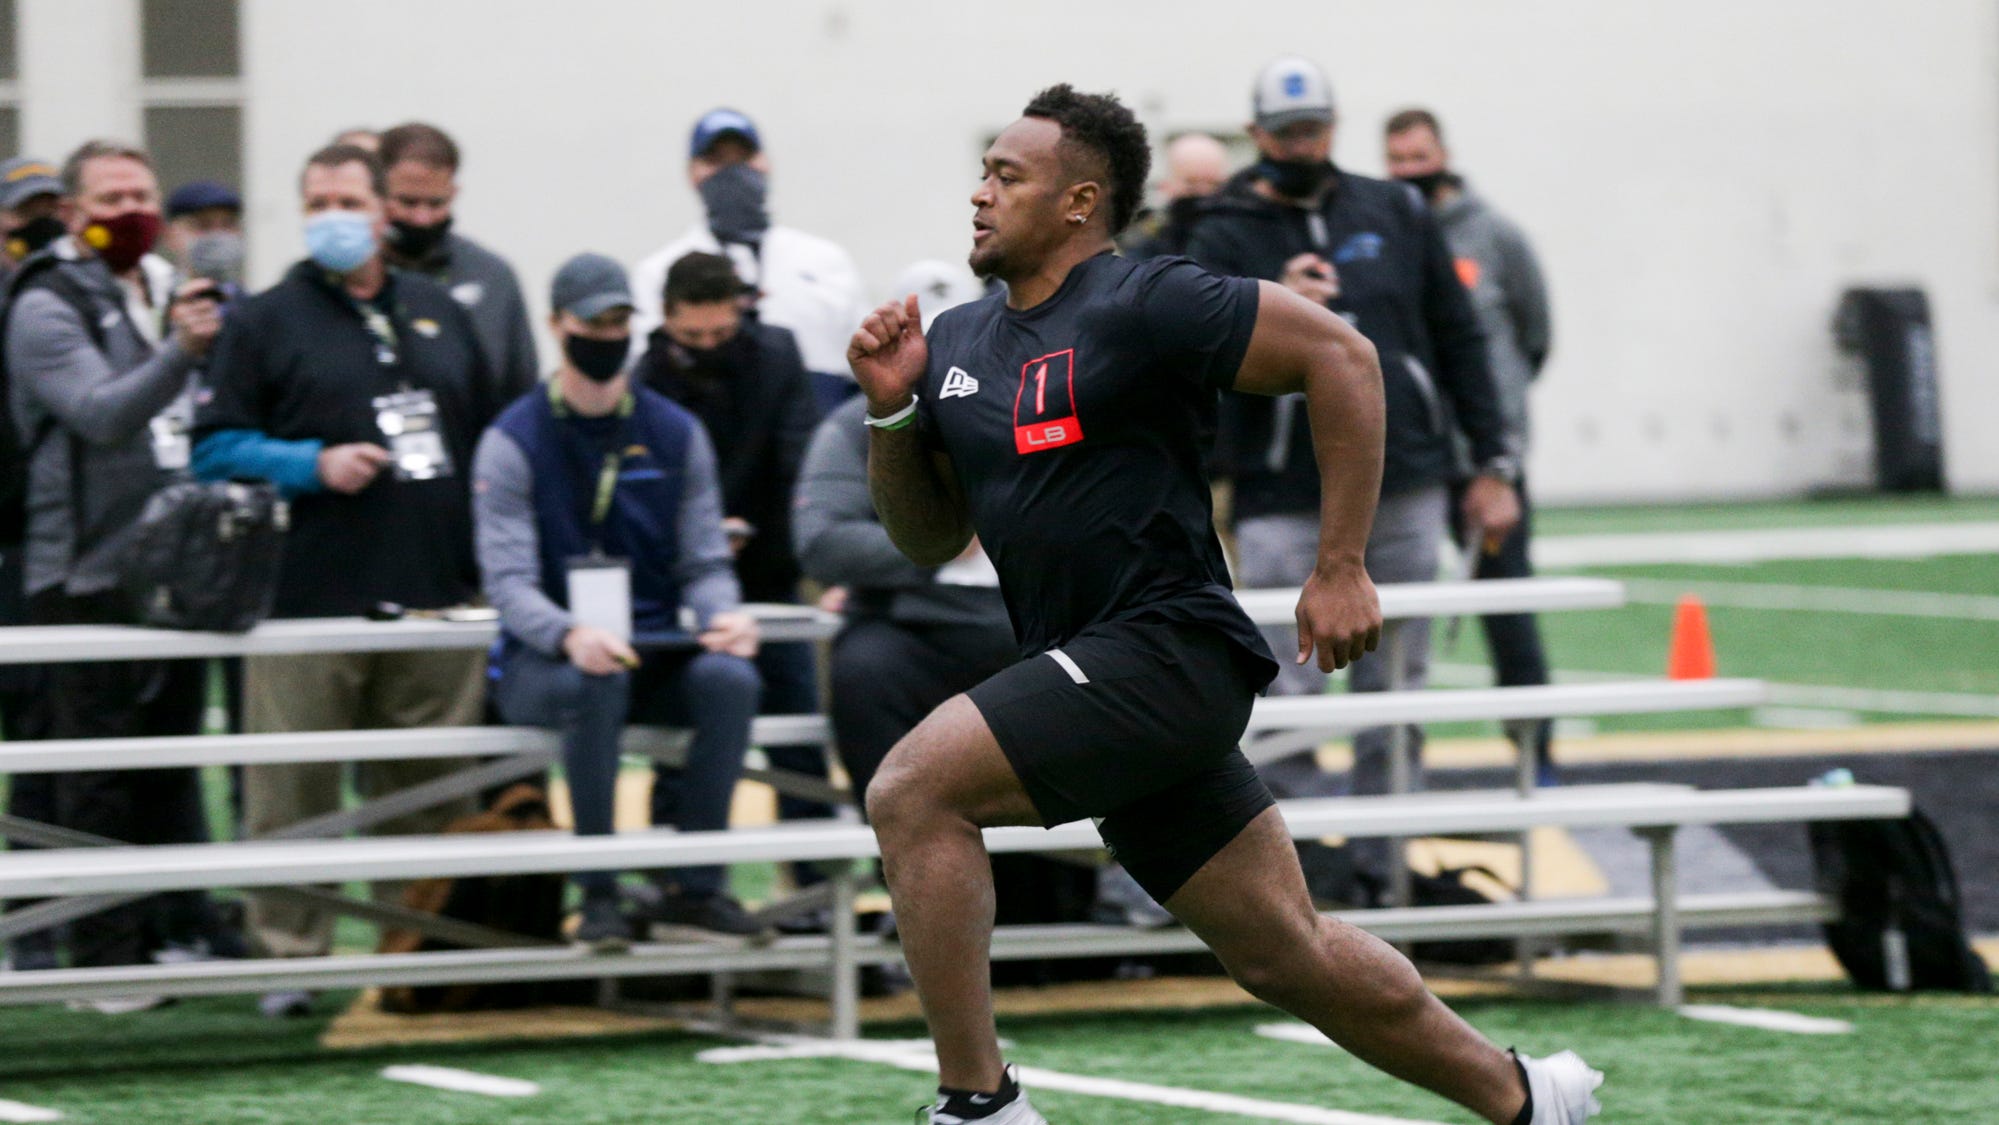 VIDEO Purdue Pro Day workout